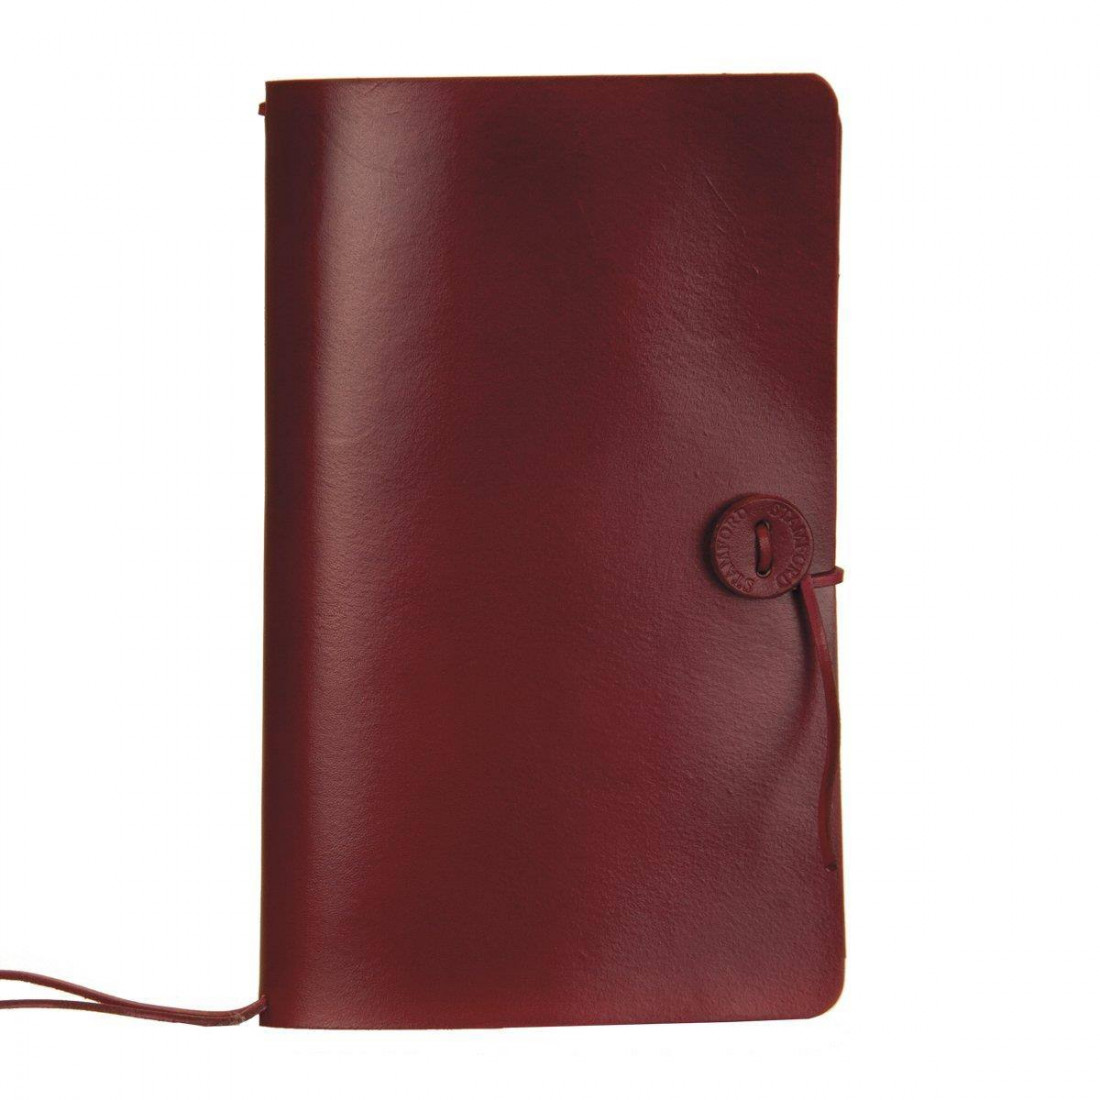 The Travellers Journal Classic Range, Burgundy, Large (18x25,5) Stamford